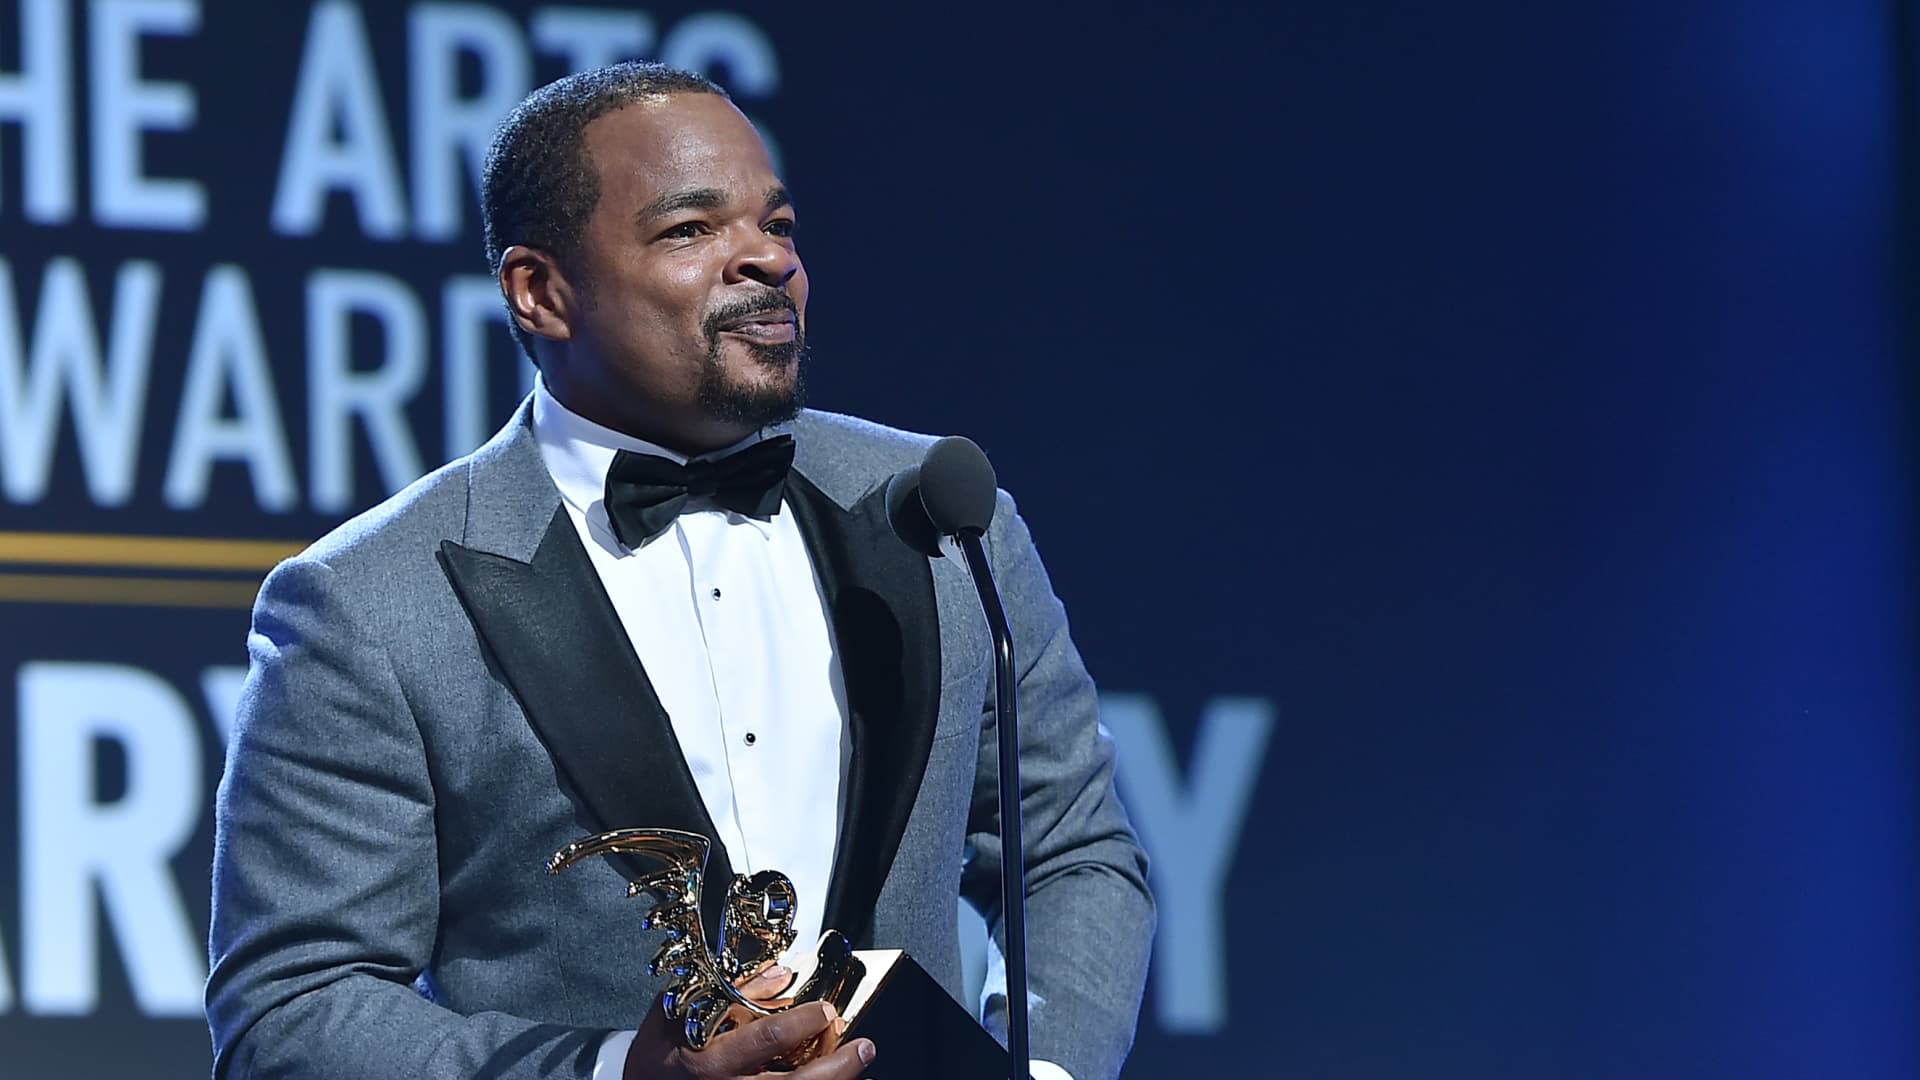 Honoree F. Gary Gray accepts the Excellence in the Arts Award onstage during BET Presents the American Black Film Festival Honors on February 17, 2017 in Beverly Hills, California.(Photo by Alberto E. Rodriguez/Getty Images)